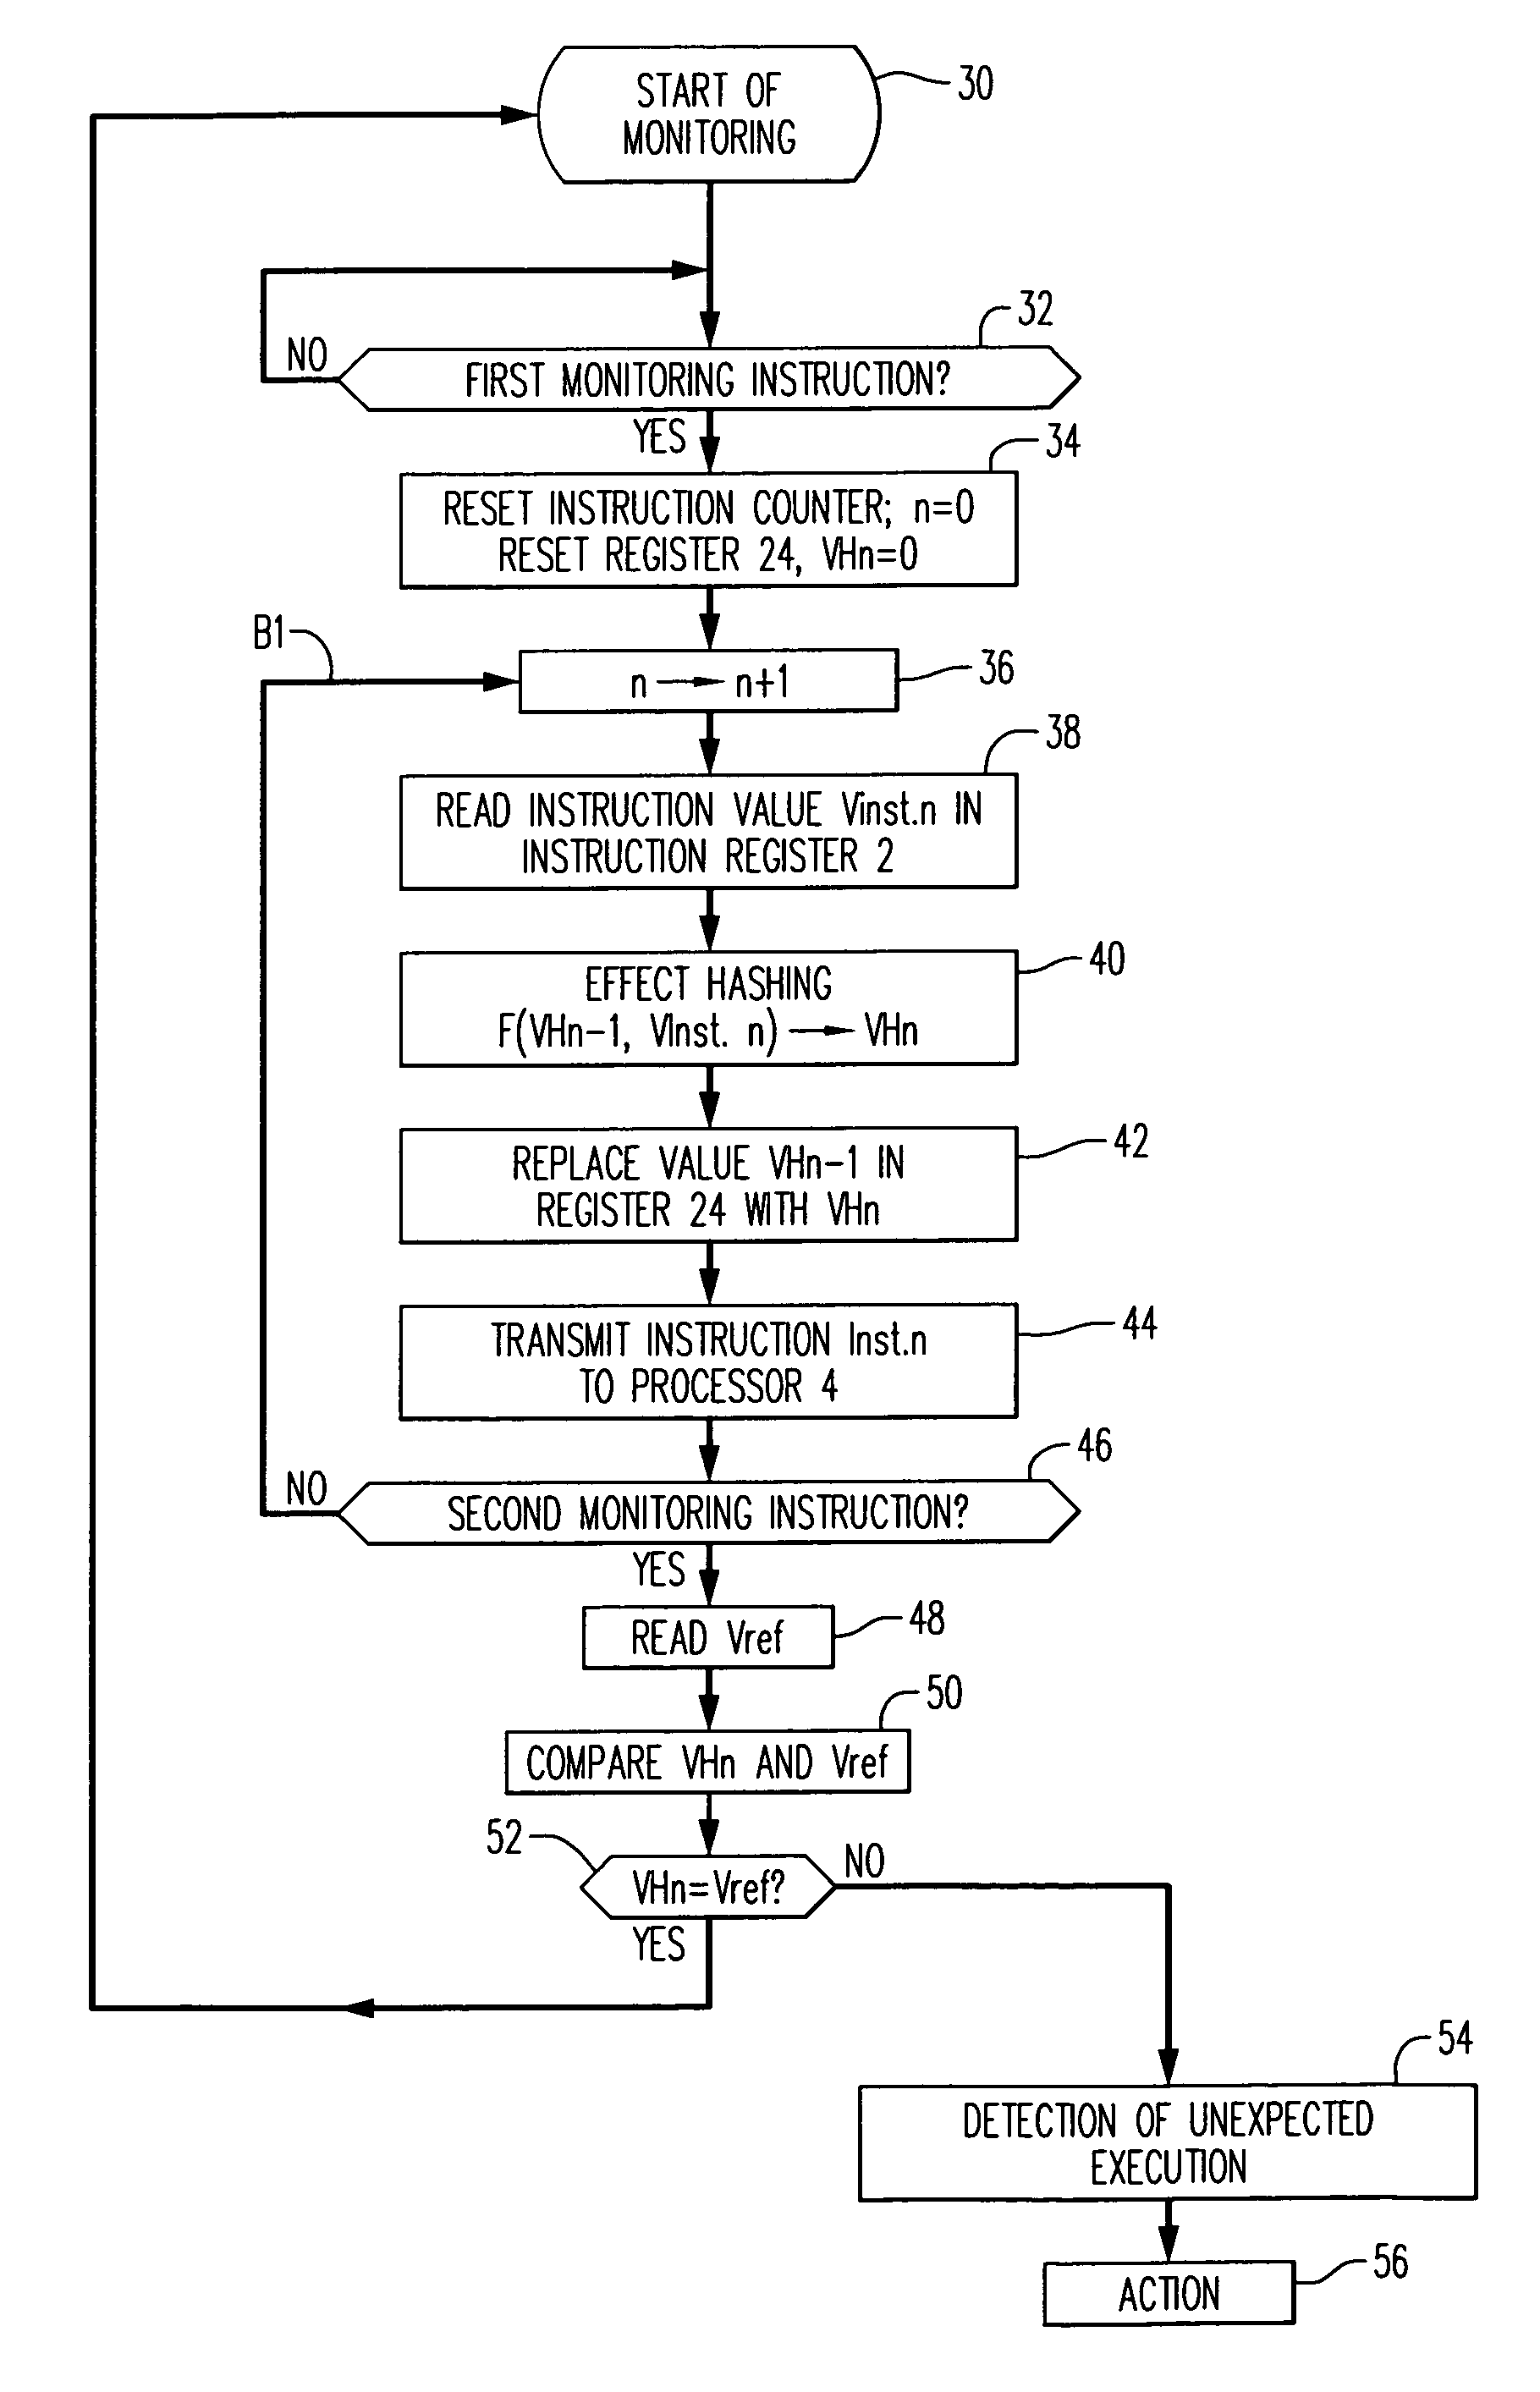 Method for monitoring program flow to verify execution of proper instructions by a processor